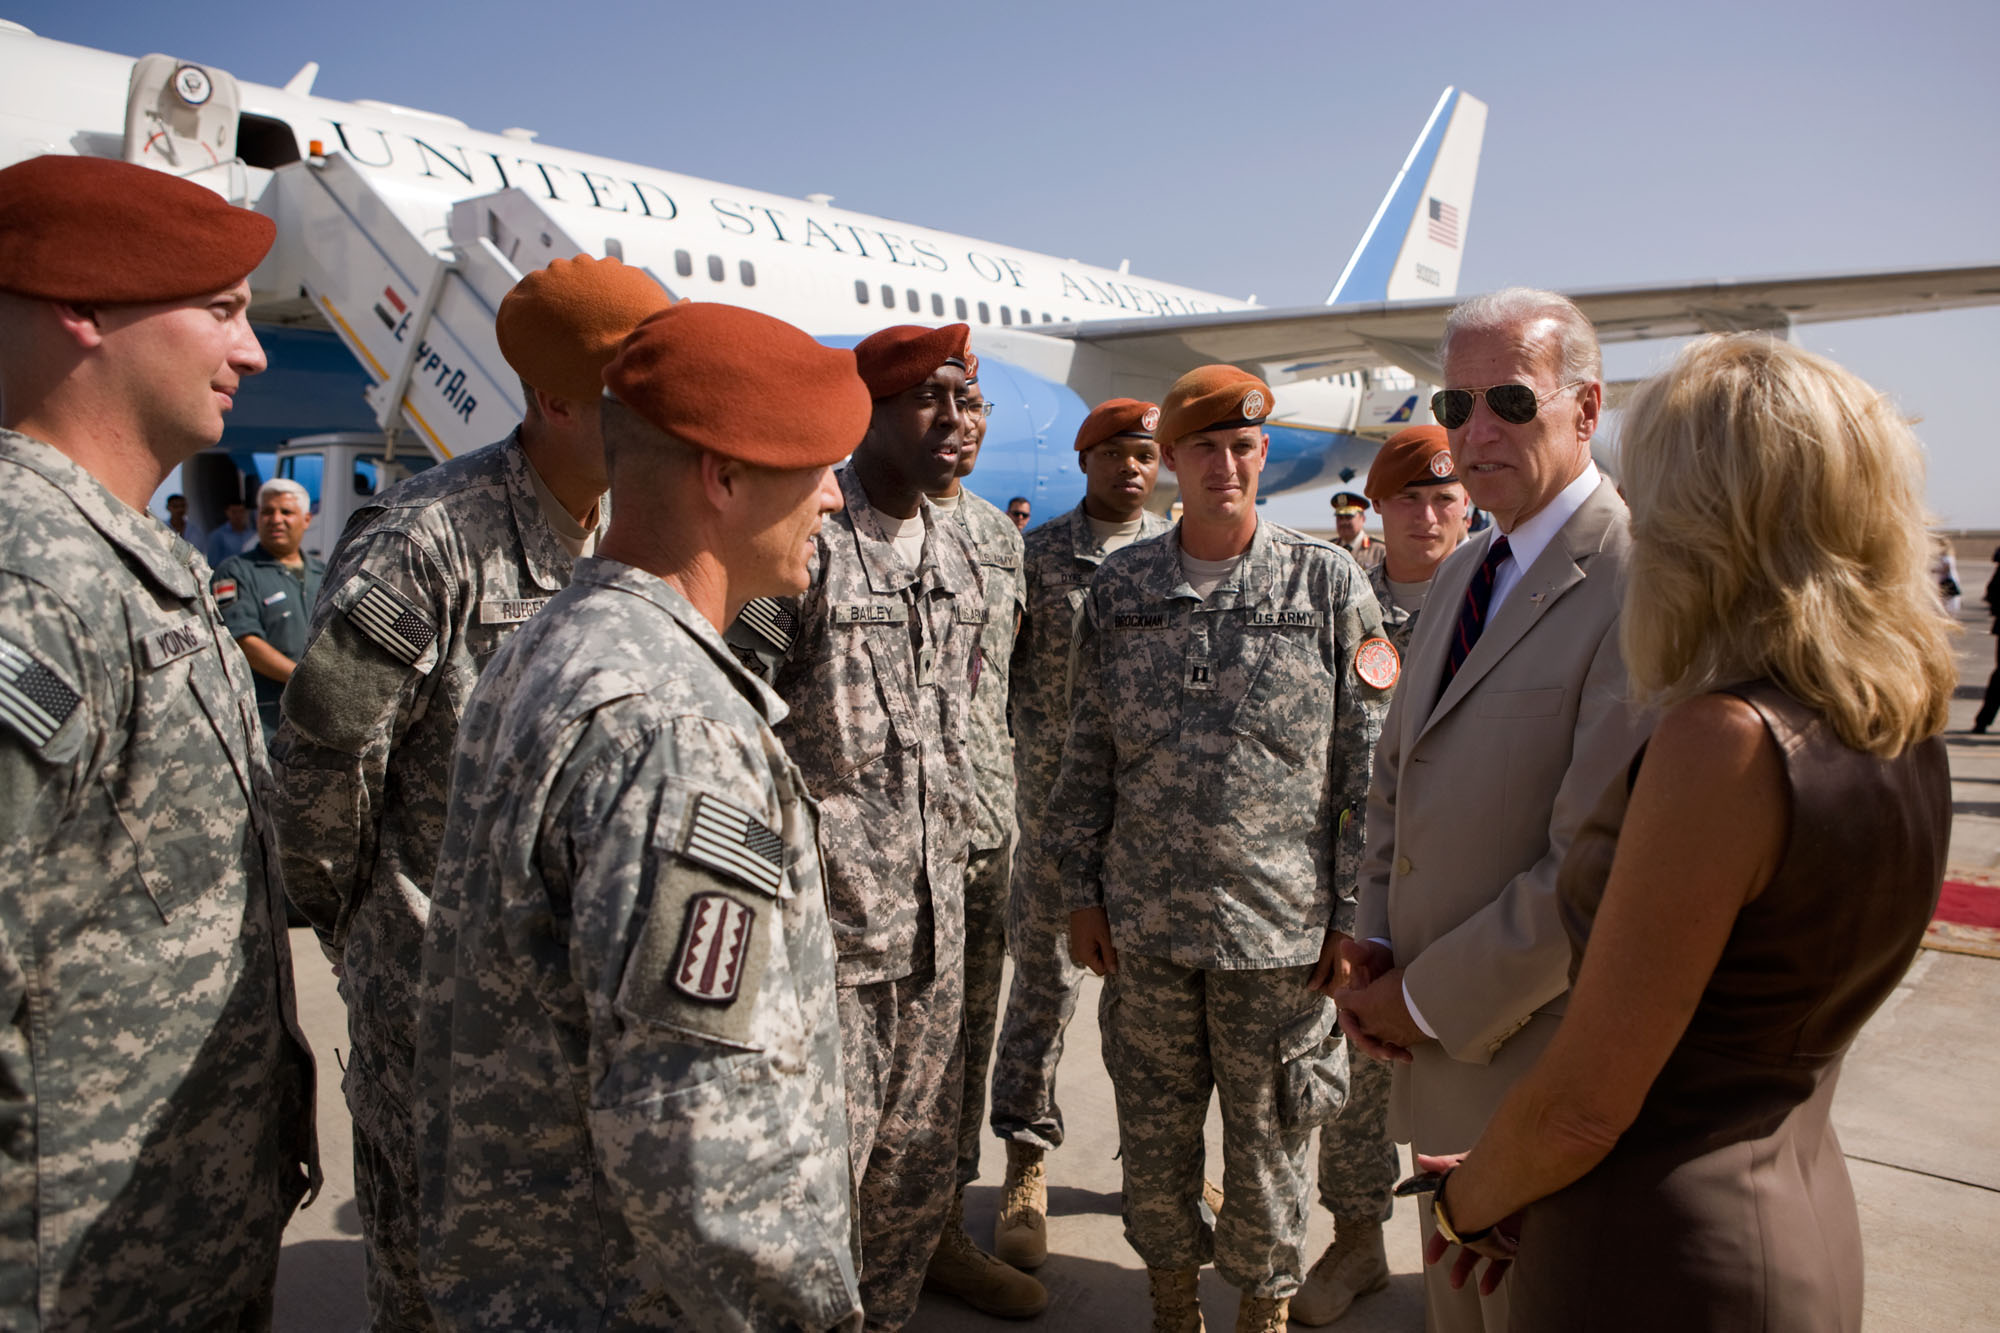 Vice President Joe Biden and Dr. Jill Biden Meet with U.S. Army Soldiers at the airport in Sharm El Sheikh, Egypt